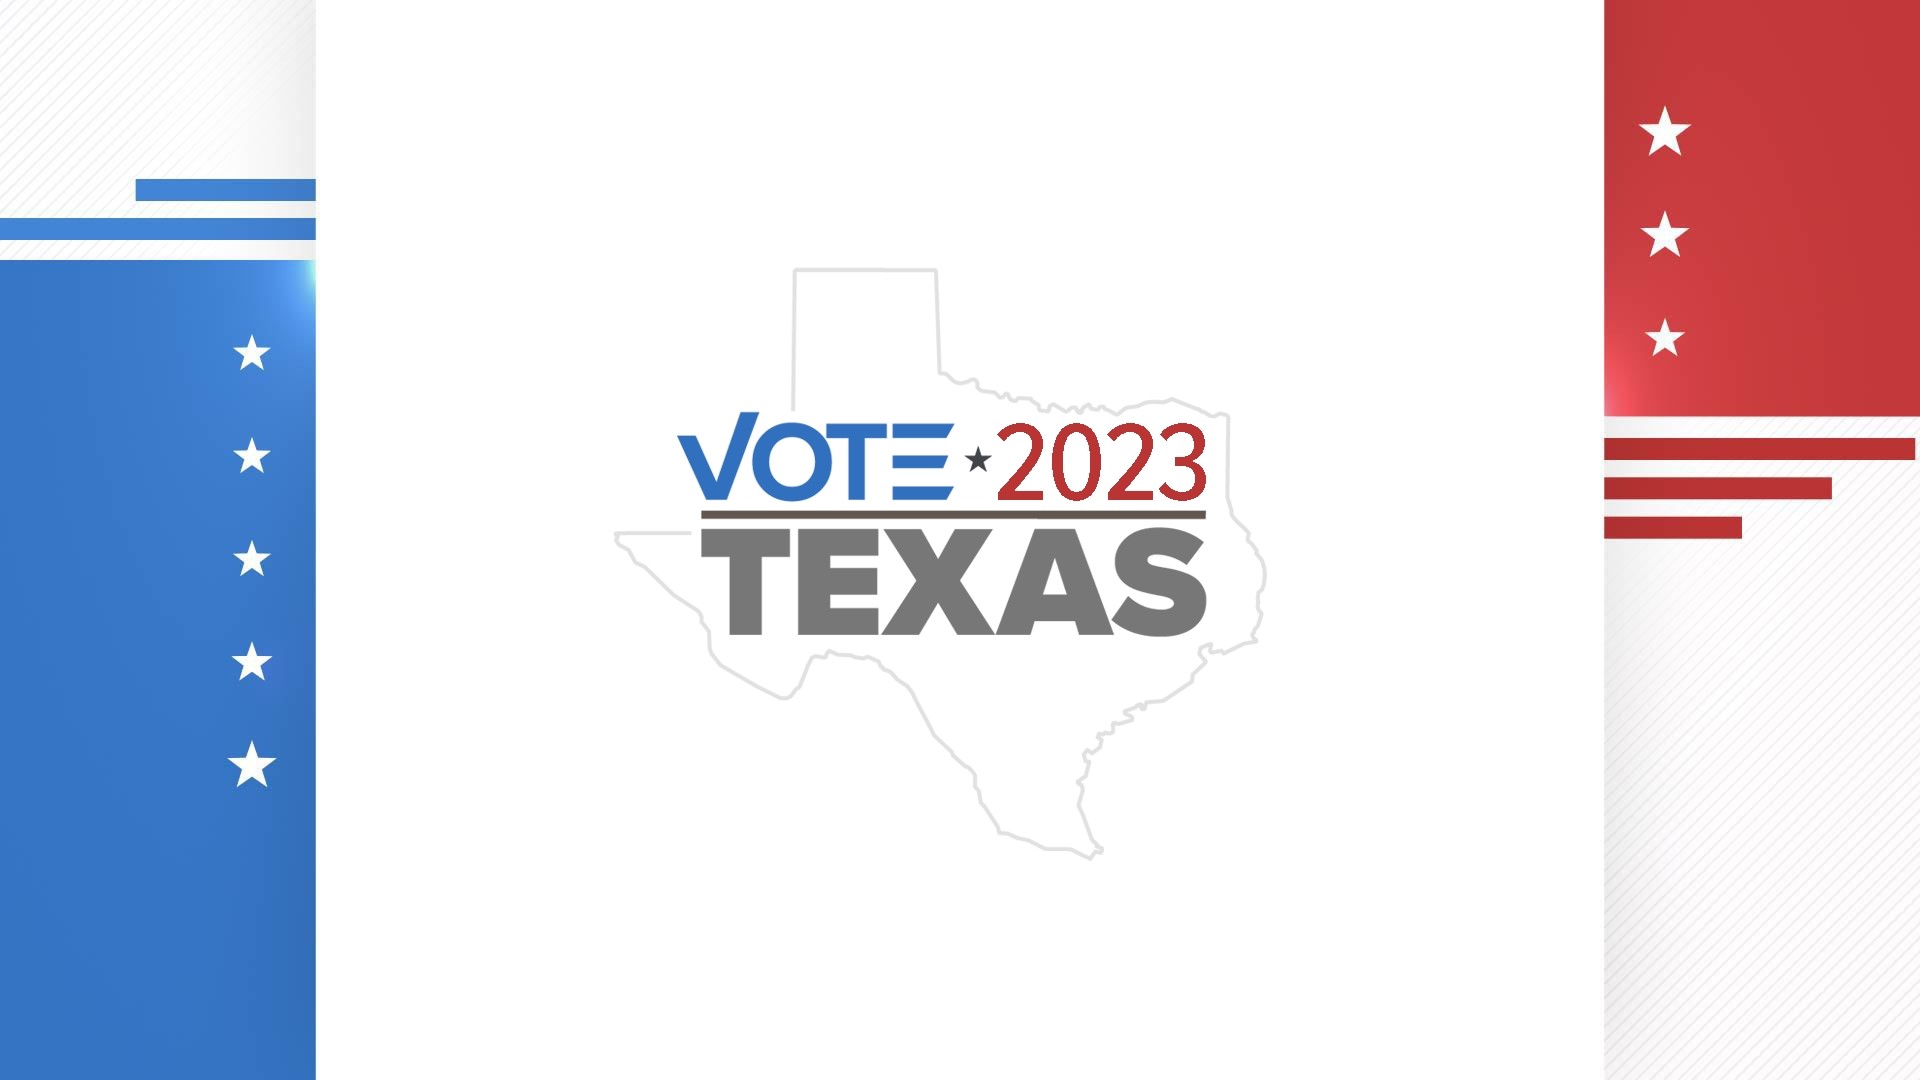 Voters across the state of Texas are heading to the polls on Tuesday for the Texas Constitutional Amendment Election as well as several local races.